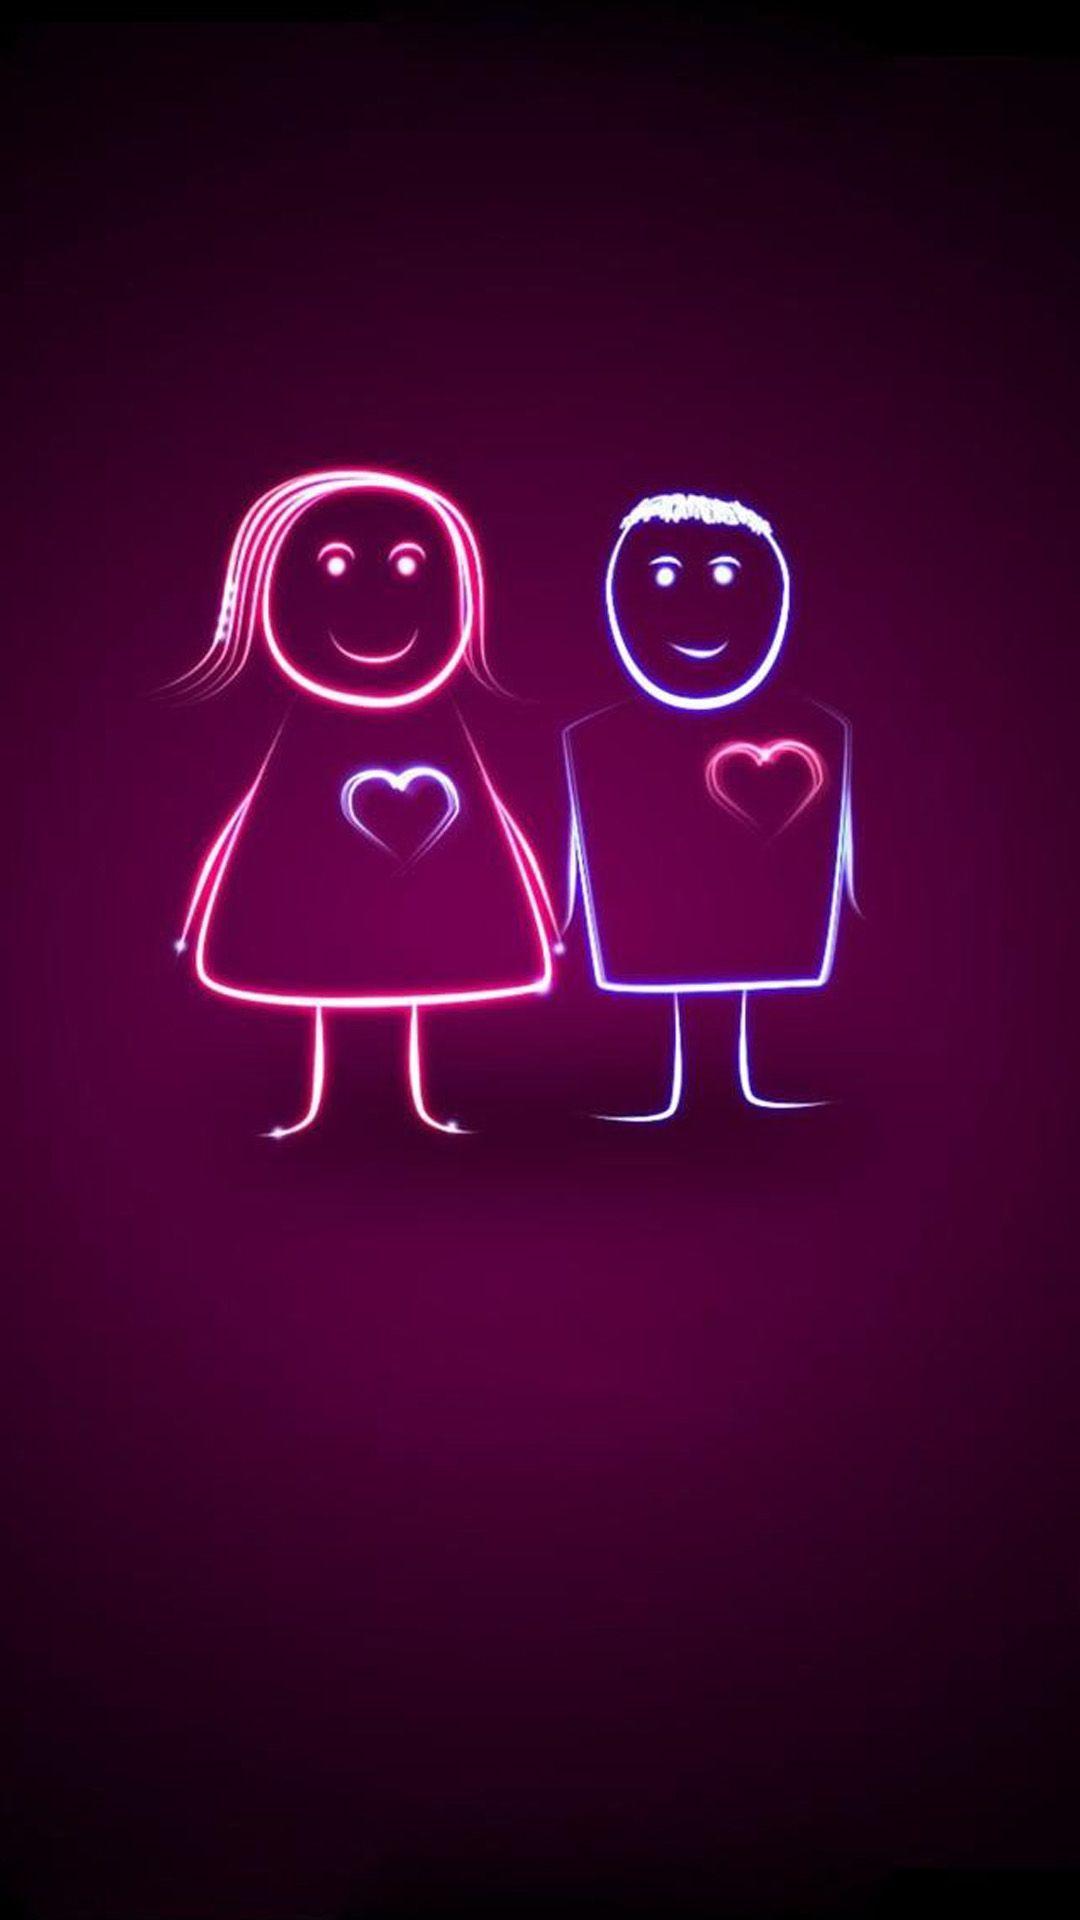 Heartbeat Lover Couple #iPhone #wallpaper. iPhone 8 wallpaper